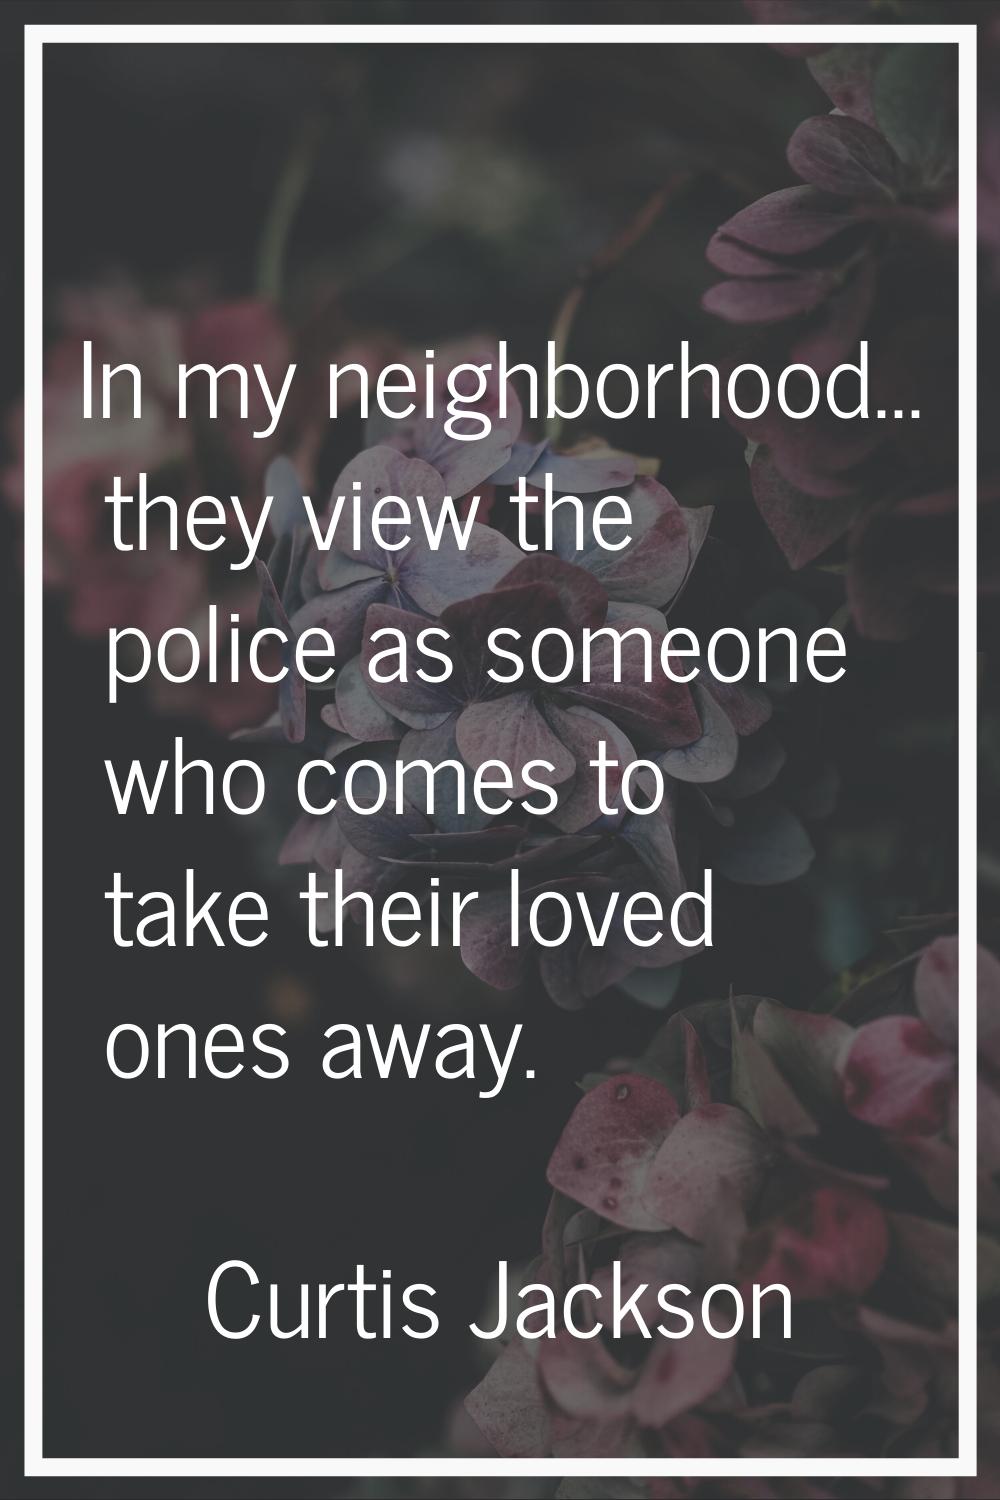 In my neighborhood... they view the police as someone who comes to take their loved ones away.